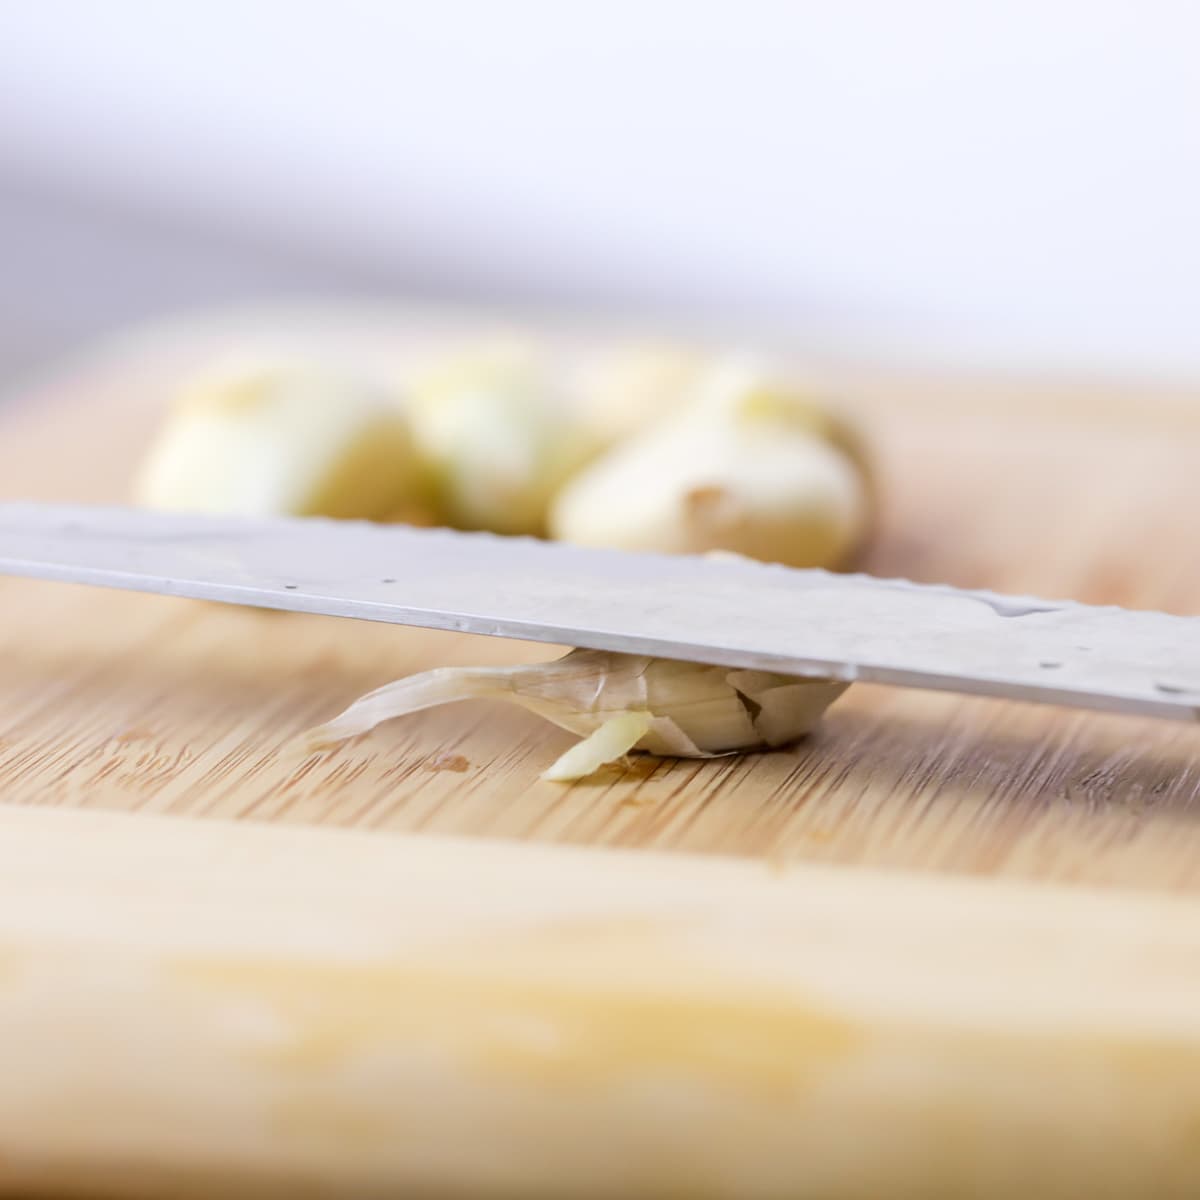 Mincing garlic with a knife